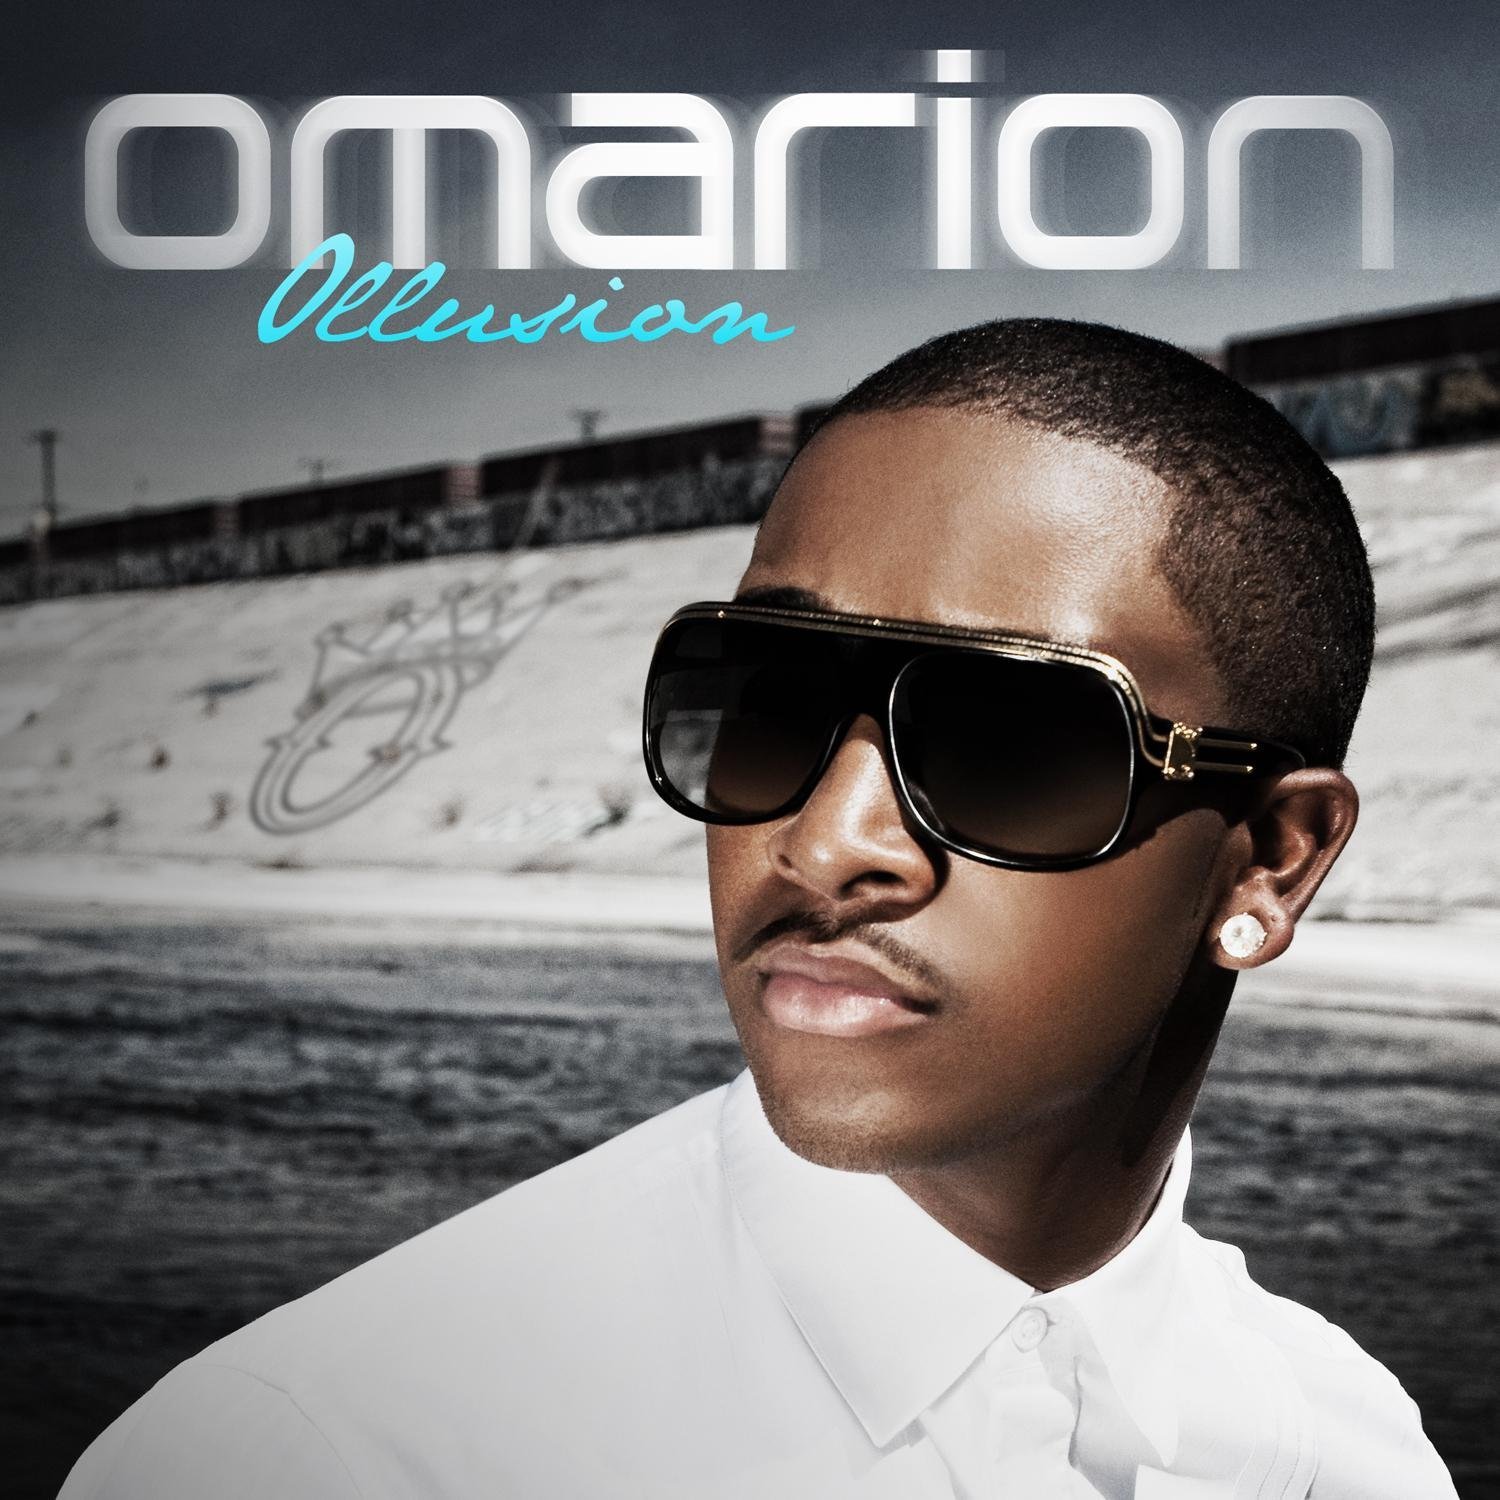 New Music: Omarion - On My Grind (featuring Tank)